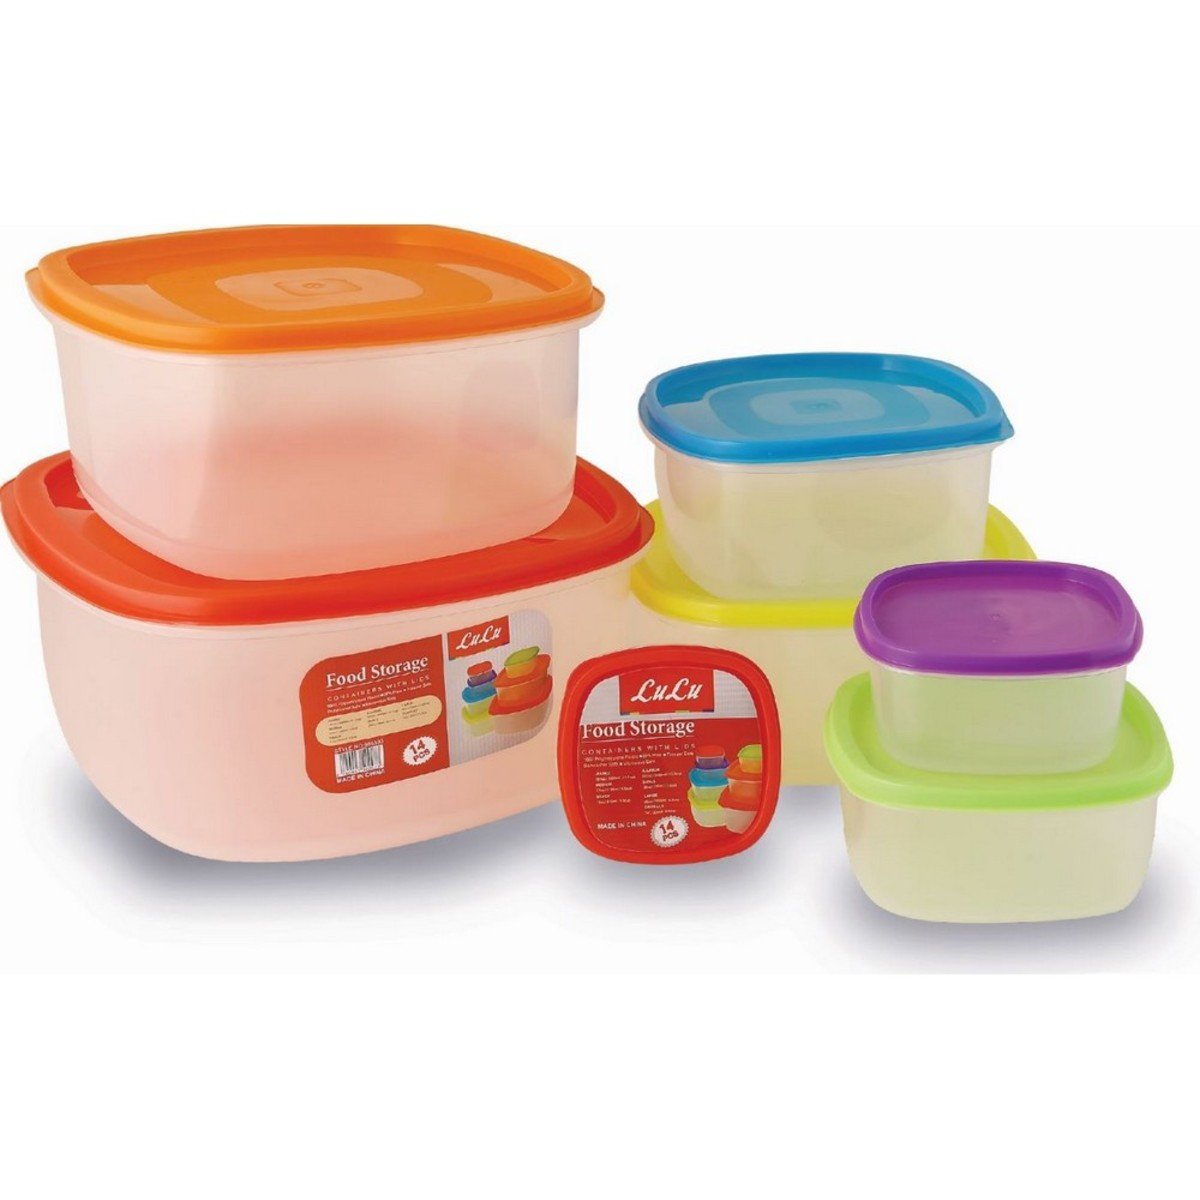 Lulu Food Container 14pcs